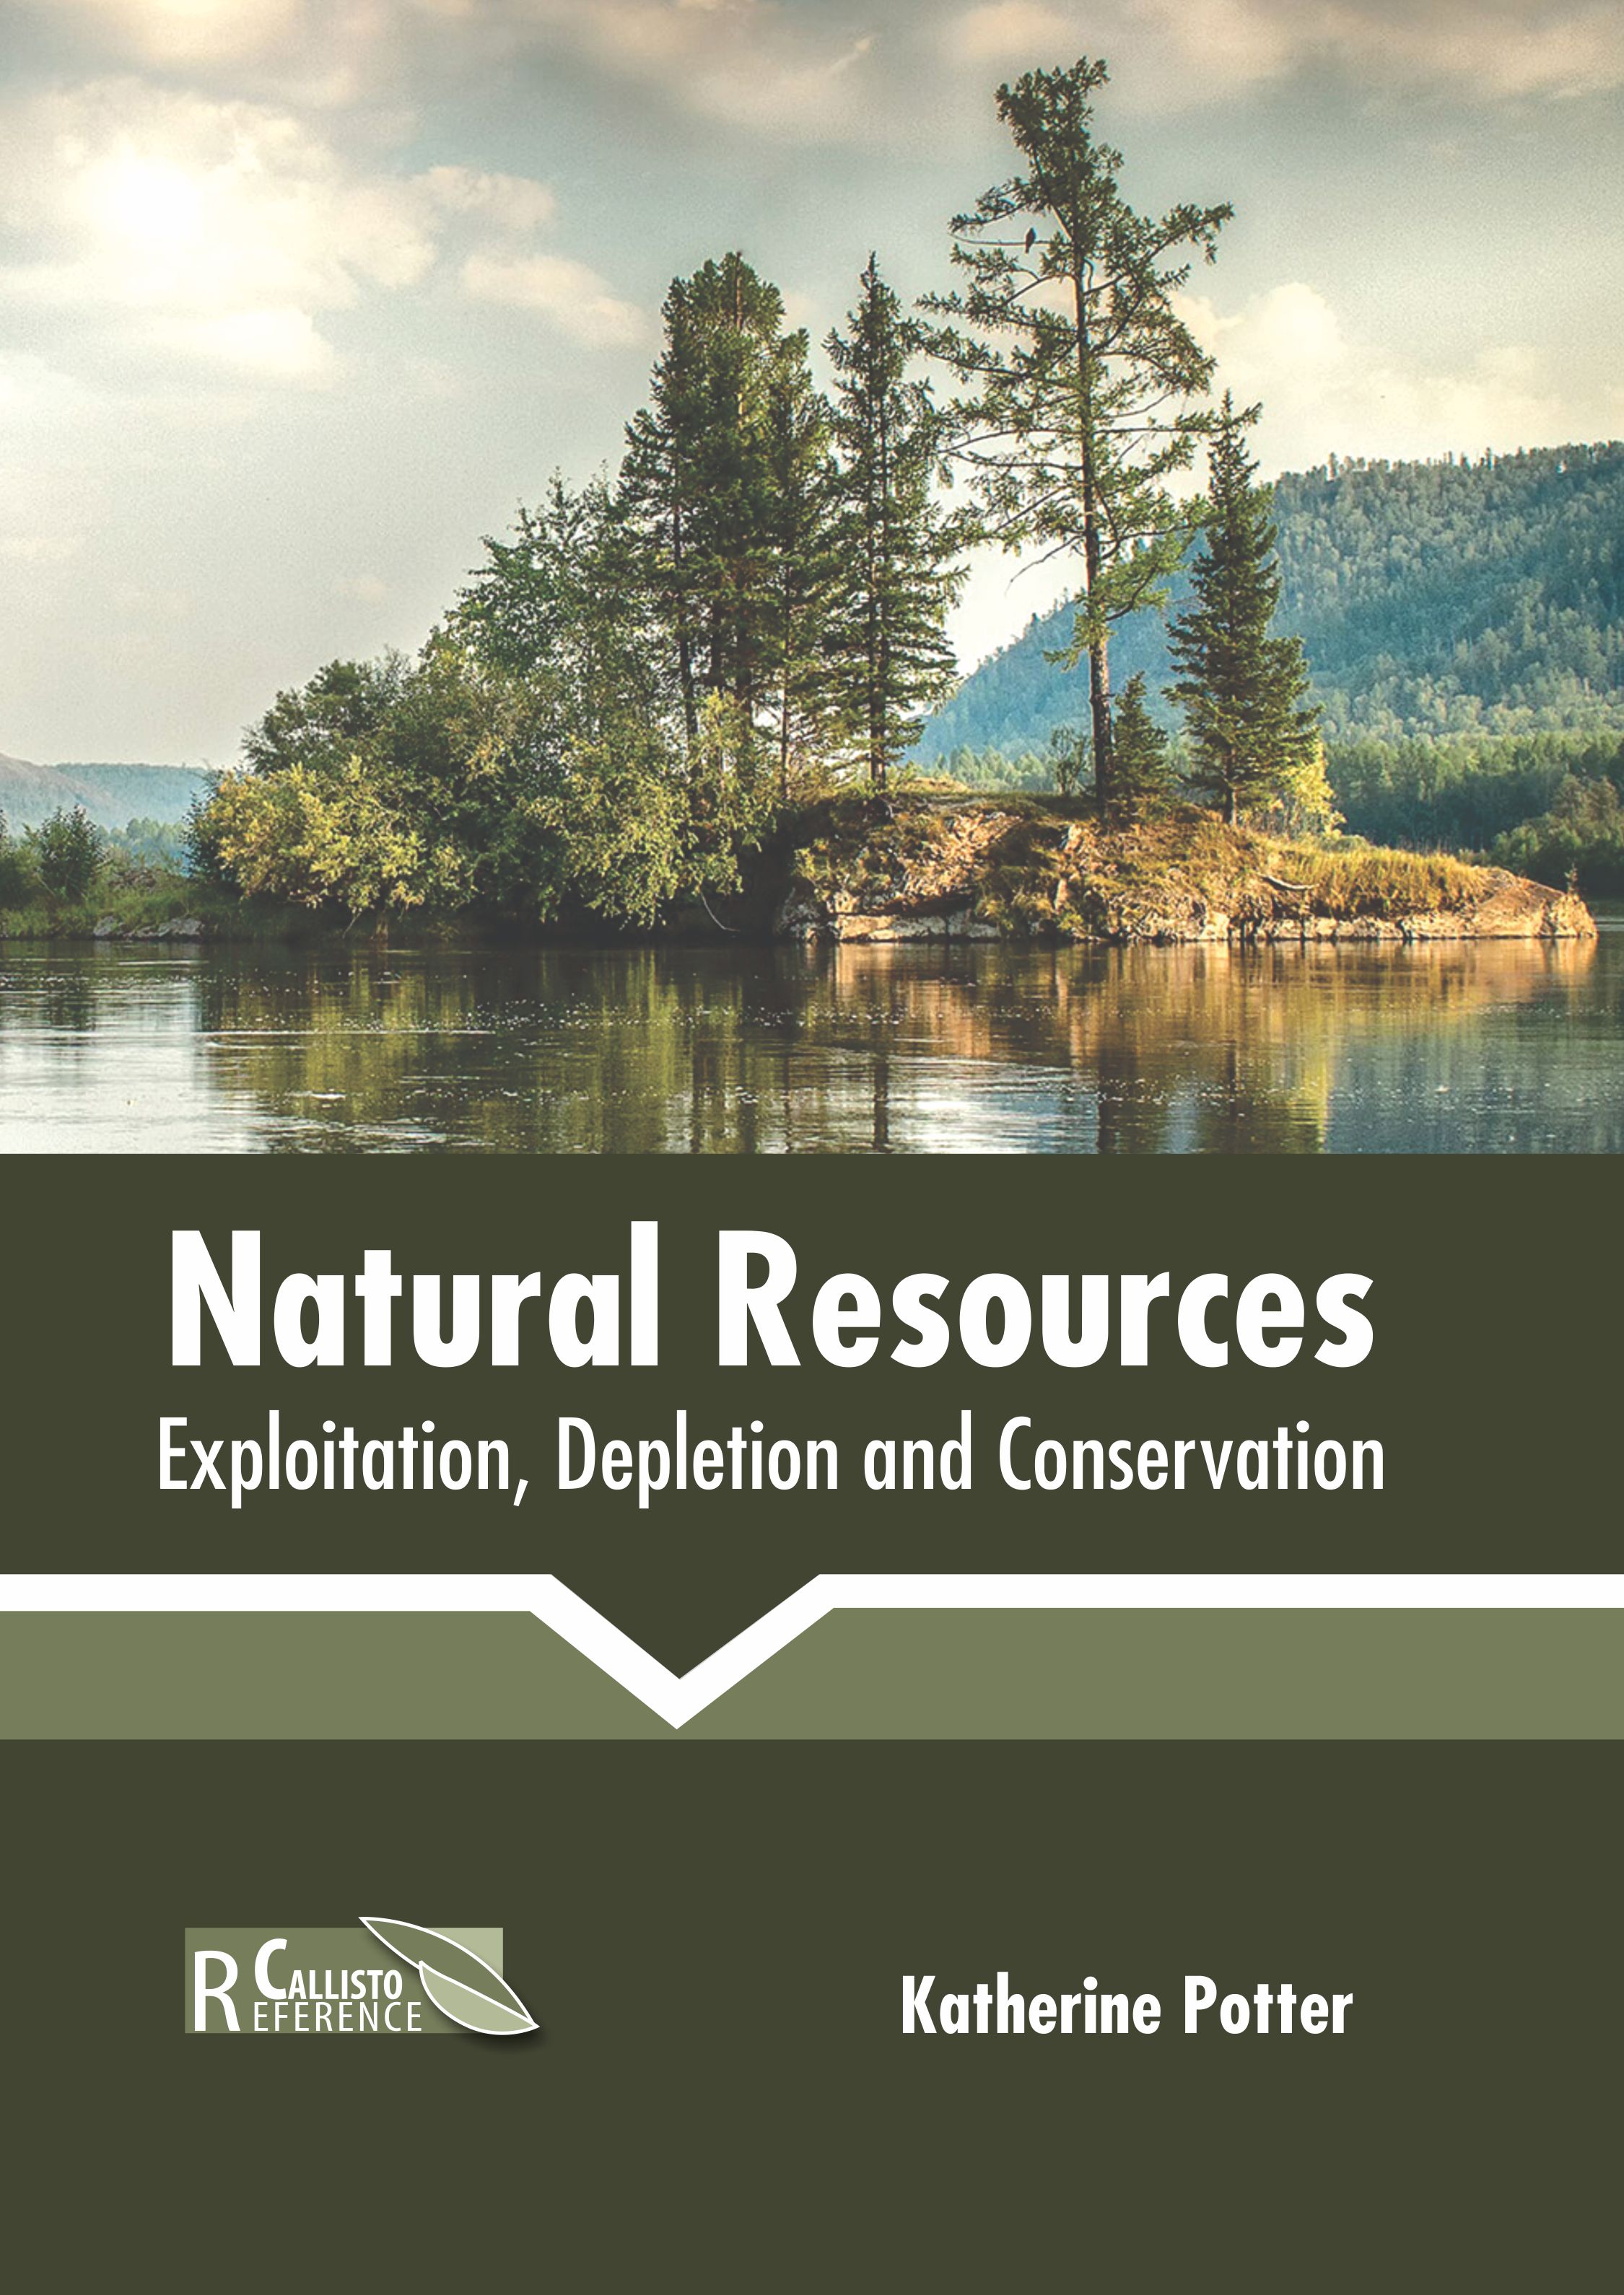 NATURAL RESOURCES: EXPLOITATION, DEPLETION AND CONSERVATION